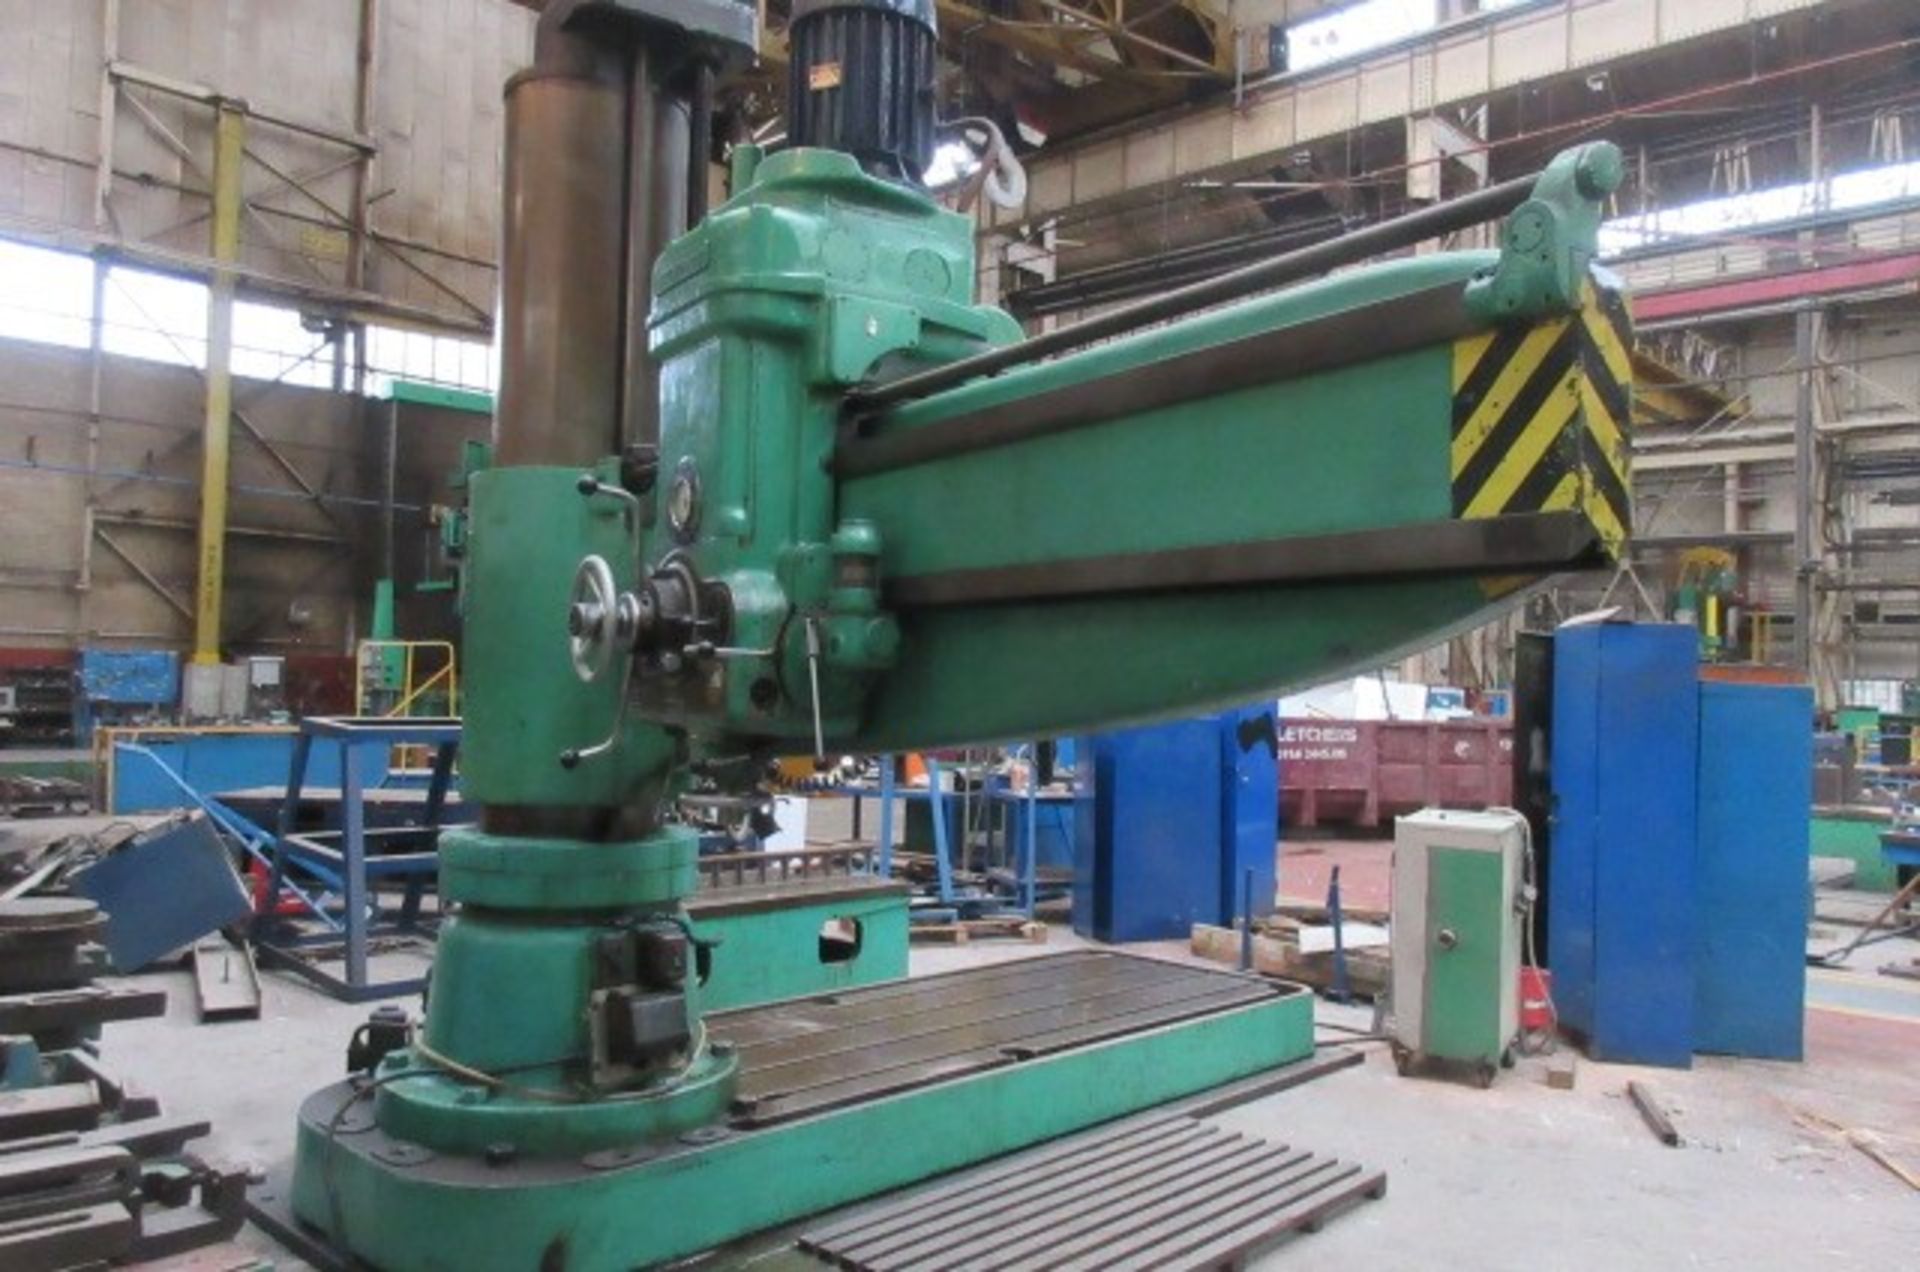 Archdale 9' radial arm drill